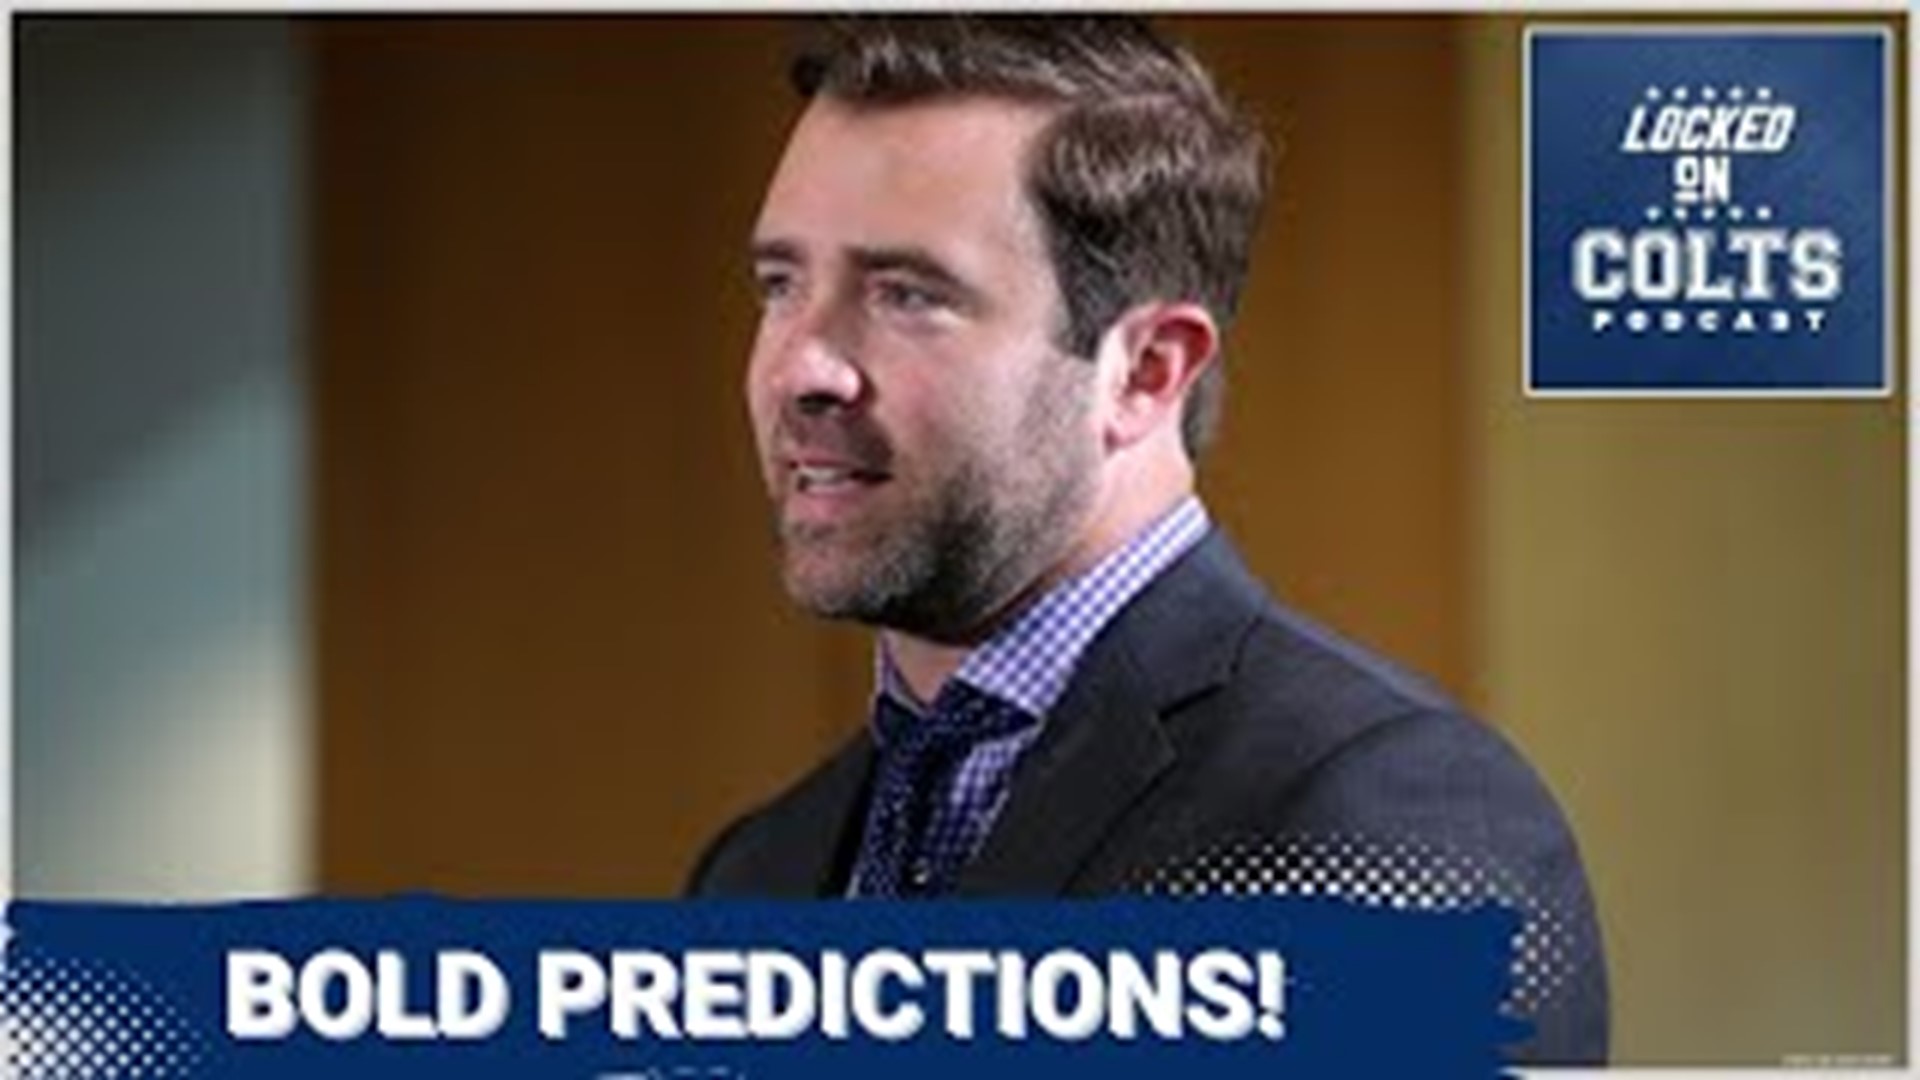 BOLD Predictions: The Colts' next head coach, who might the Colts trade away, and more!